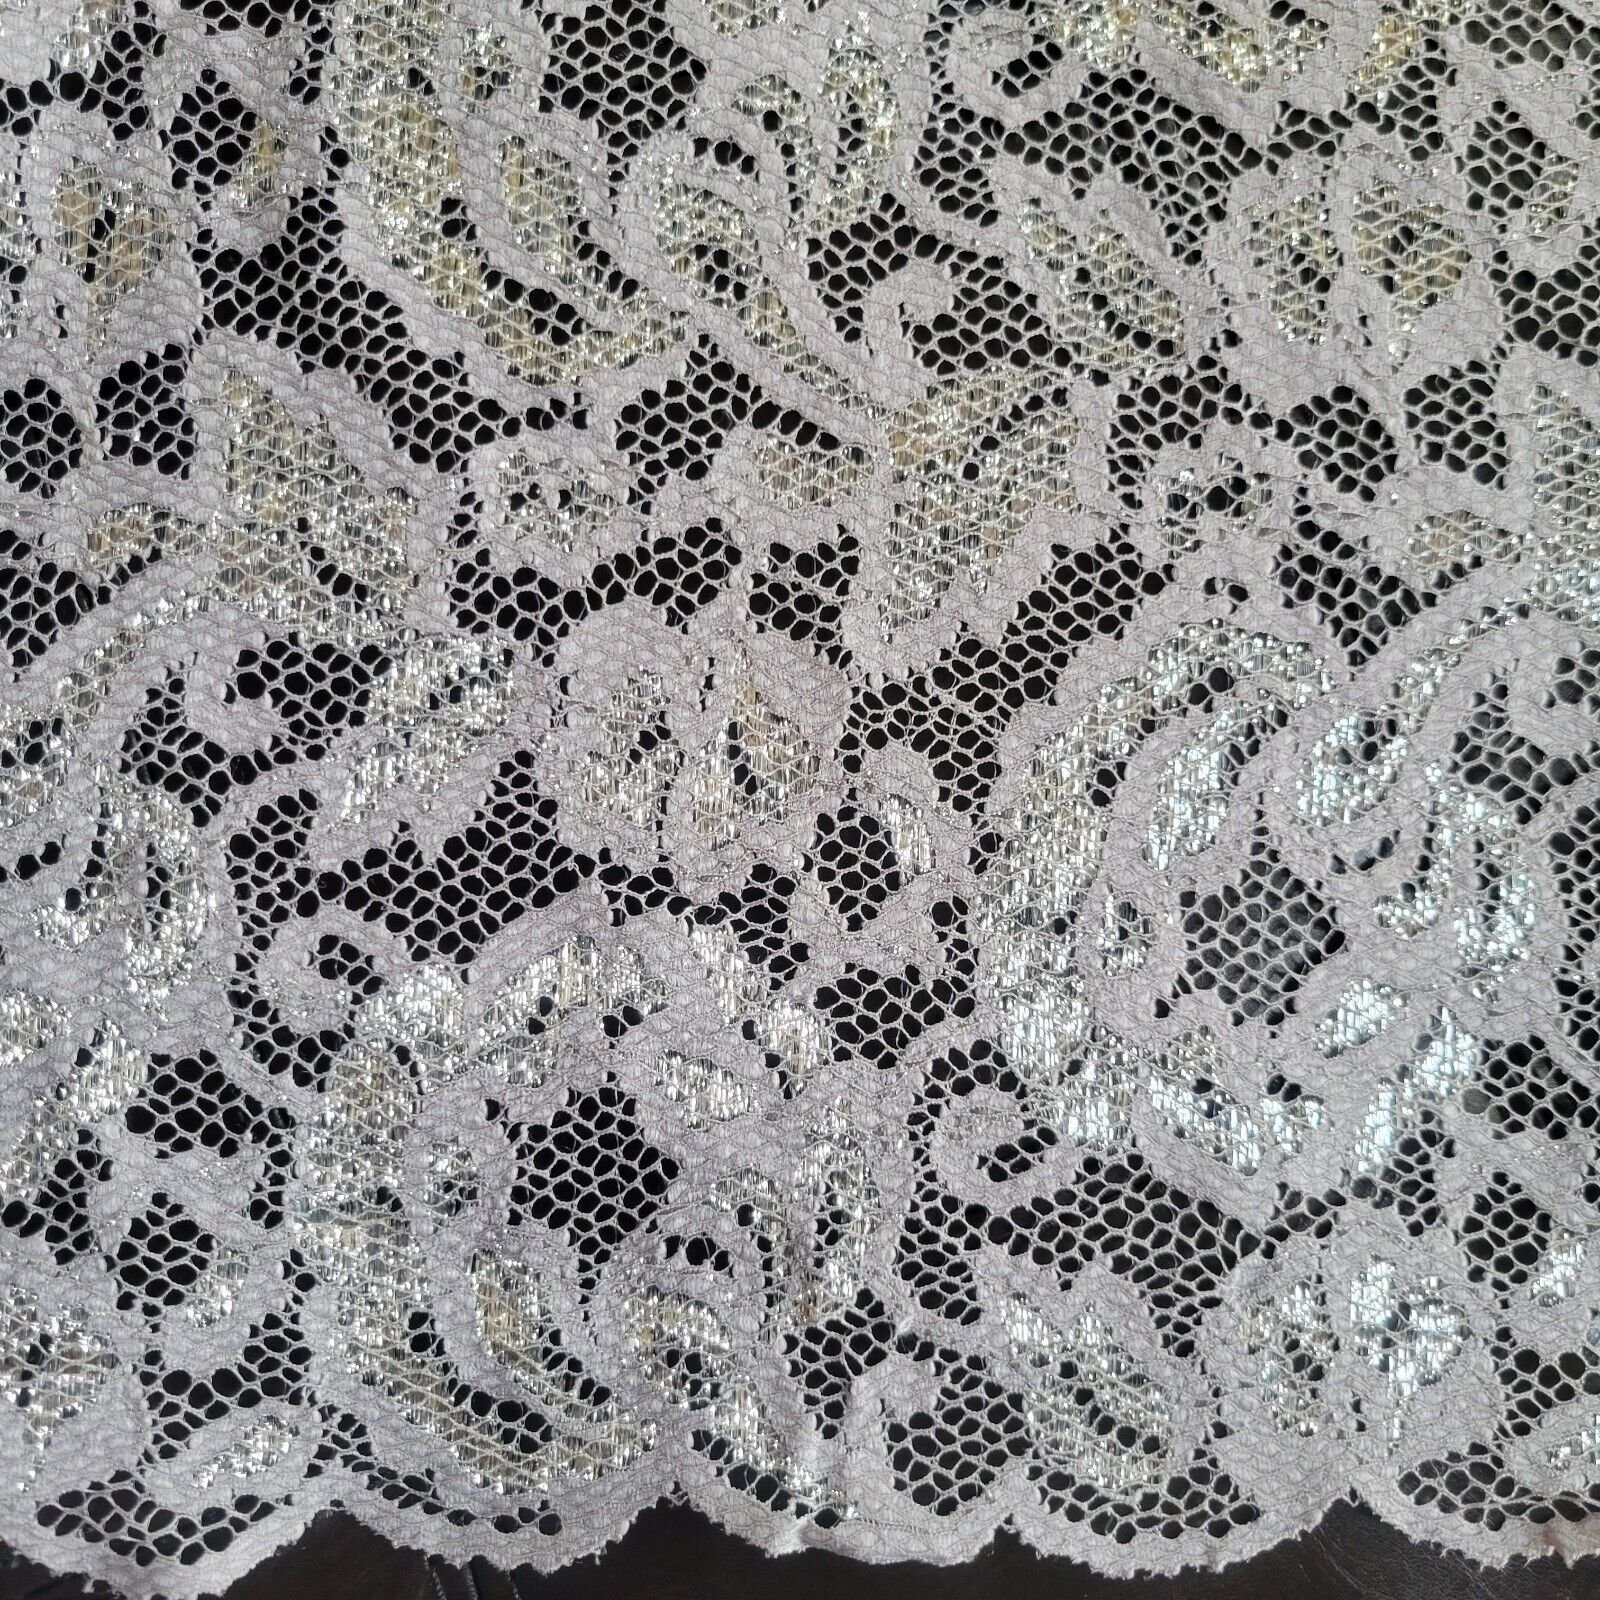 Gray & Metallic Silver Double-Scalloped 2-Way Stretch Lace - Designer  Overstock!